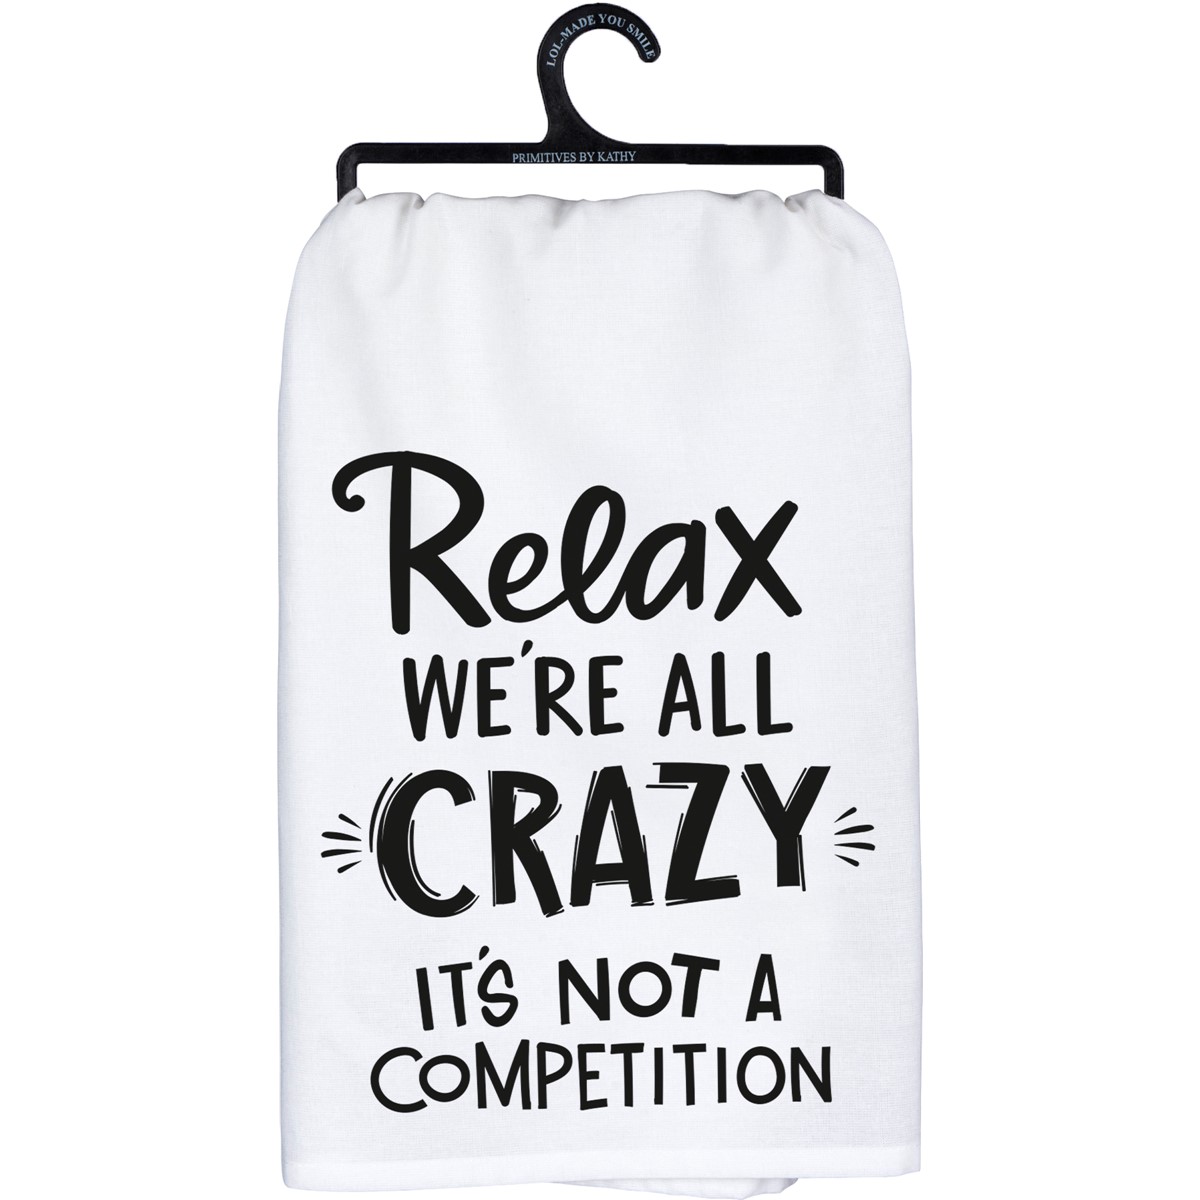 Relax It's Not A Competition Kitchen Towel - Cotton